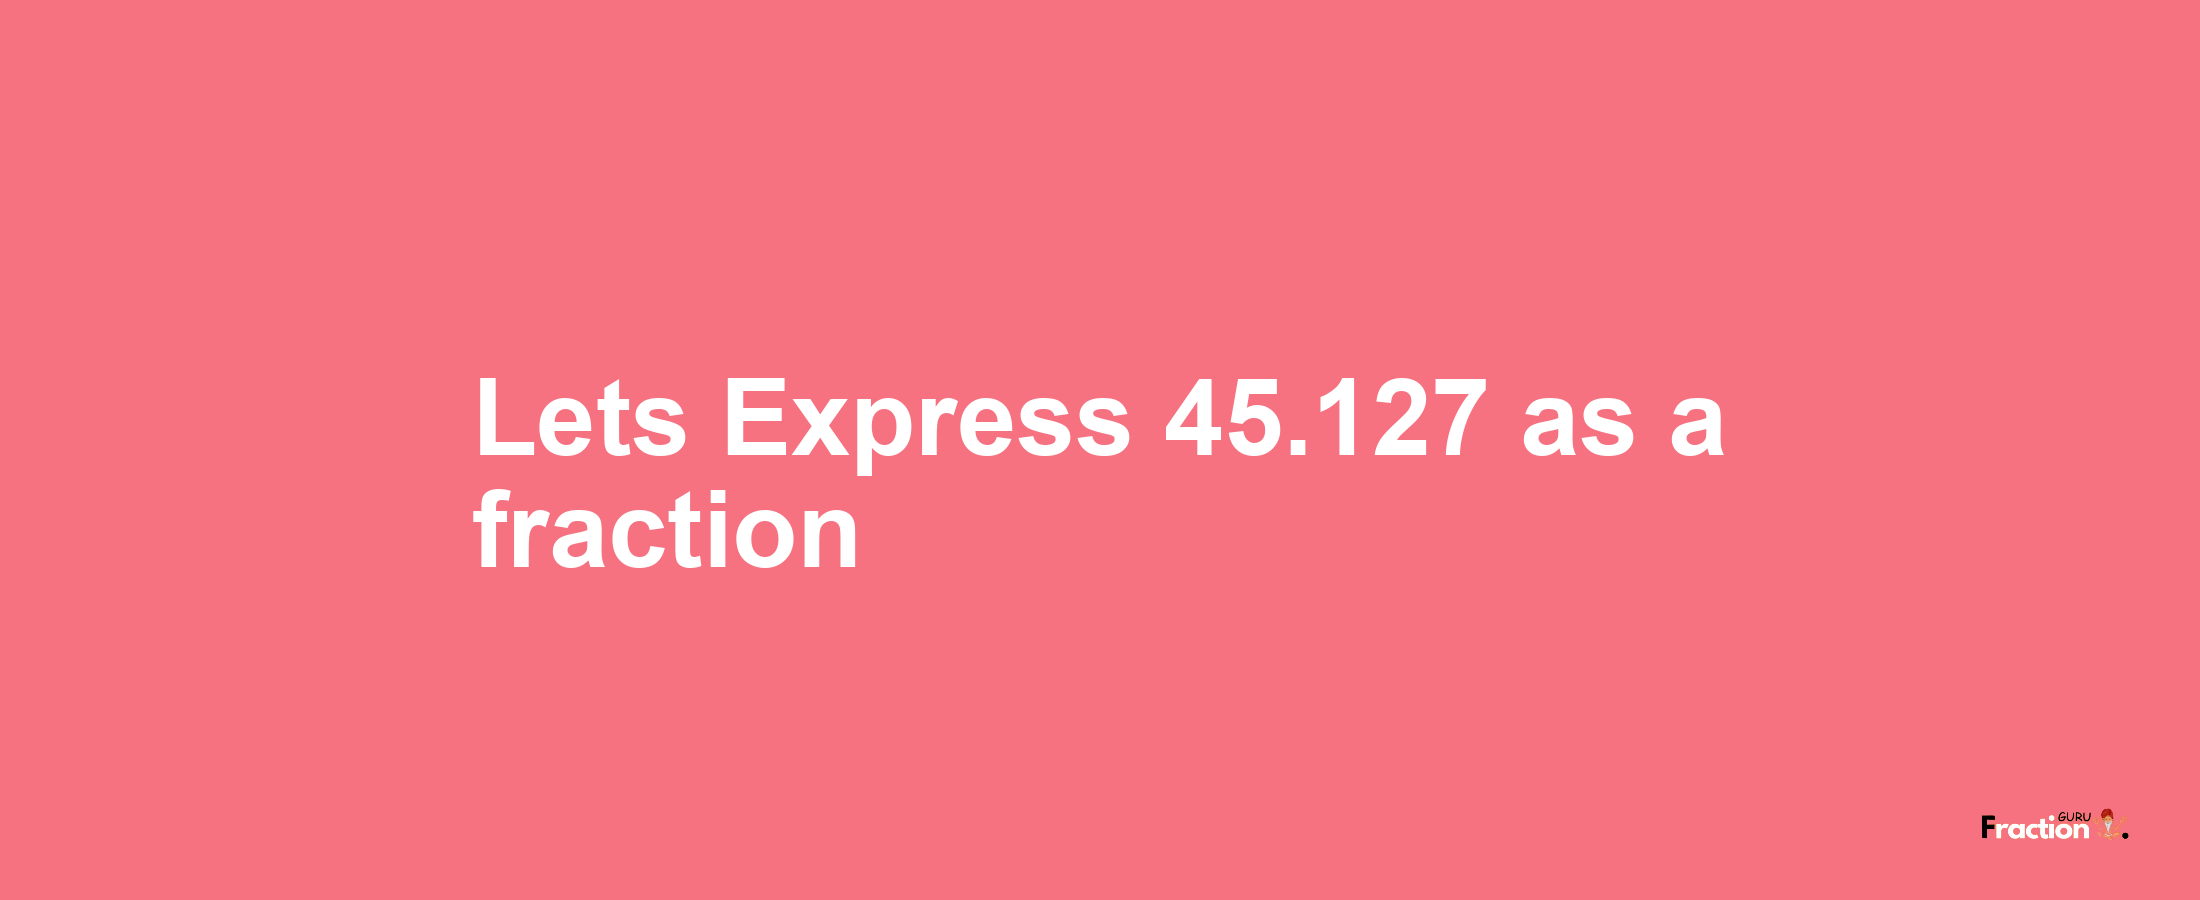 Lets Express 45.127 as afraction